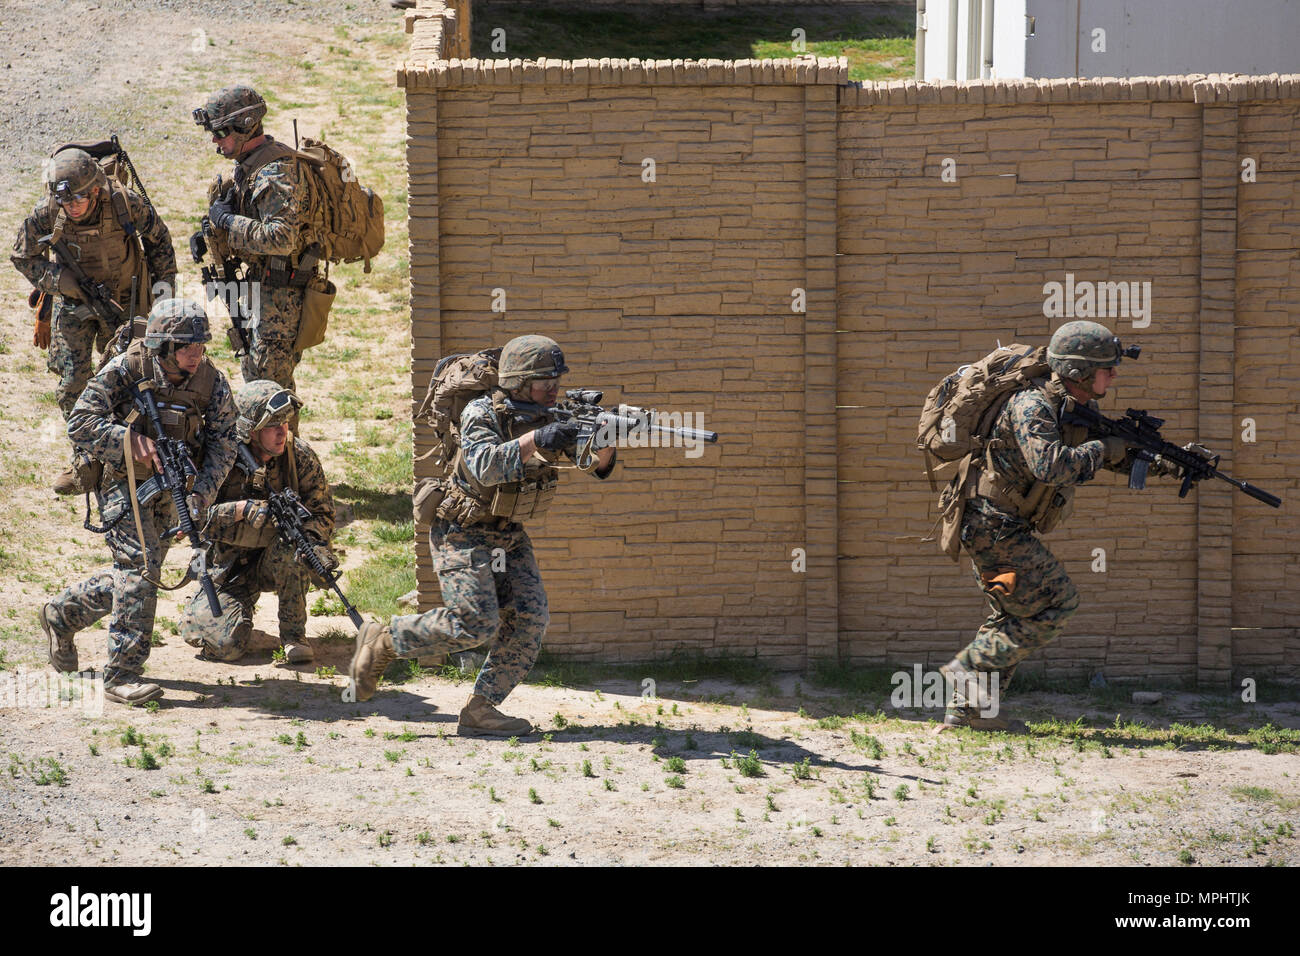 Marines with 3rd Battalion, 5th Marine Regiment buddy-rush during a raid rehearsal at Camp Pendleton, Calif., March 16, 2017. Marines with 3rd Battalion, 5th Marine Regiment are training to maintain unit proficiency and preparing to deploy with the 15th Marine Expeditionary Force. (U.S. Marine Corps photo by Lance Cpl. Rhita Daniel) Stock Photo